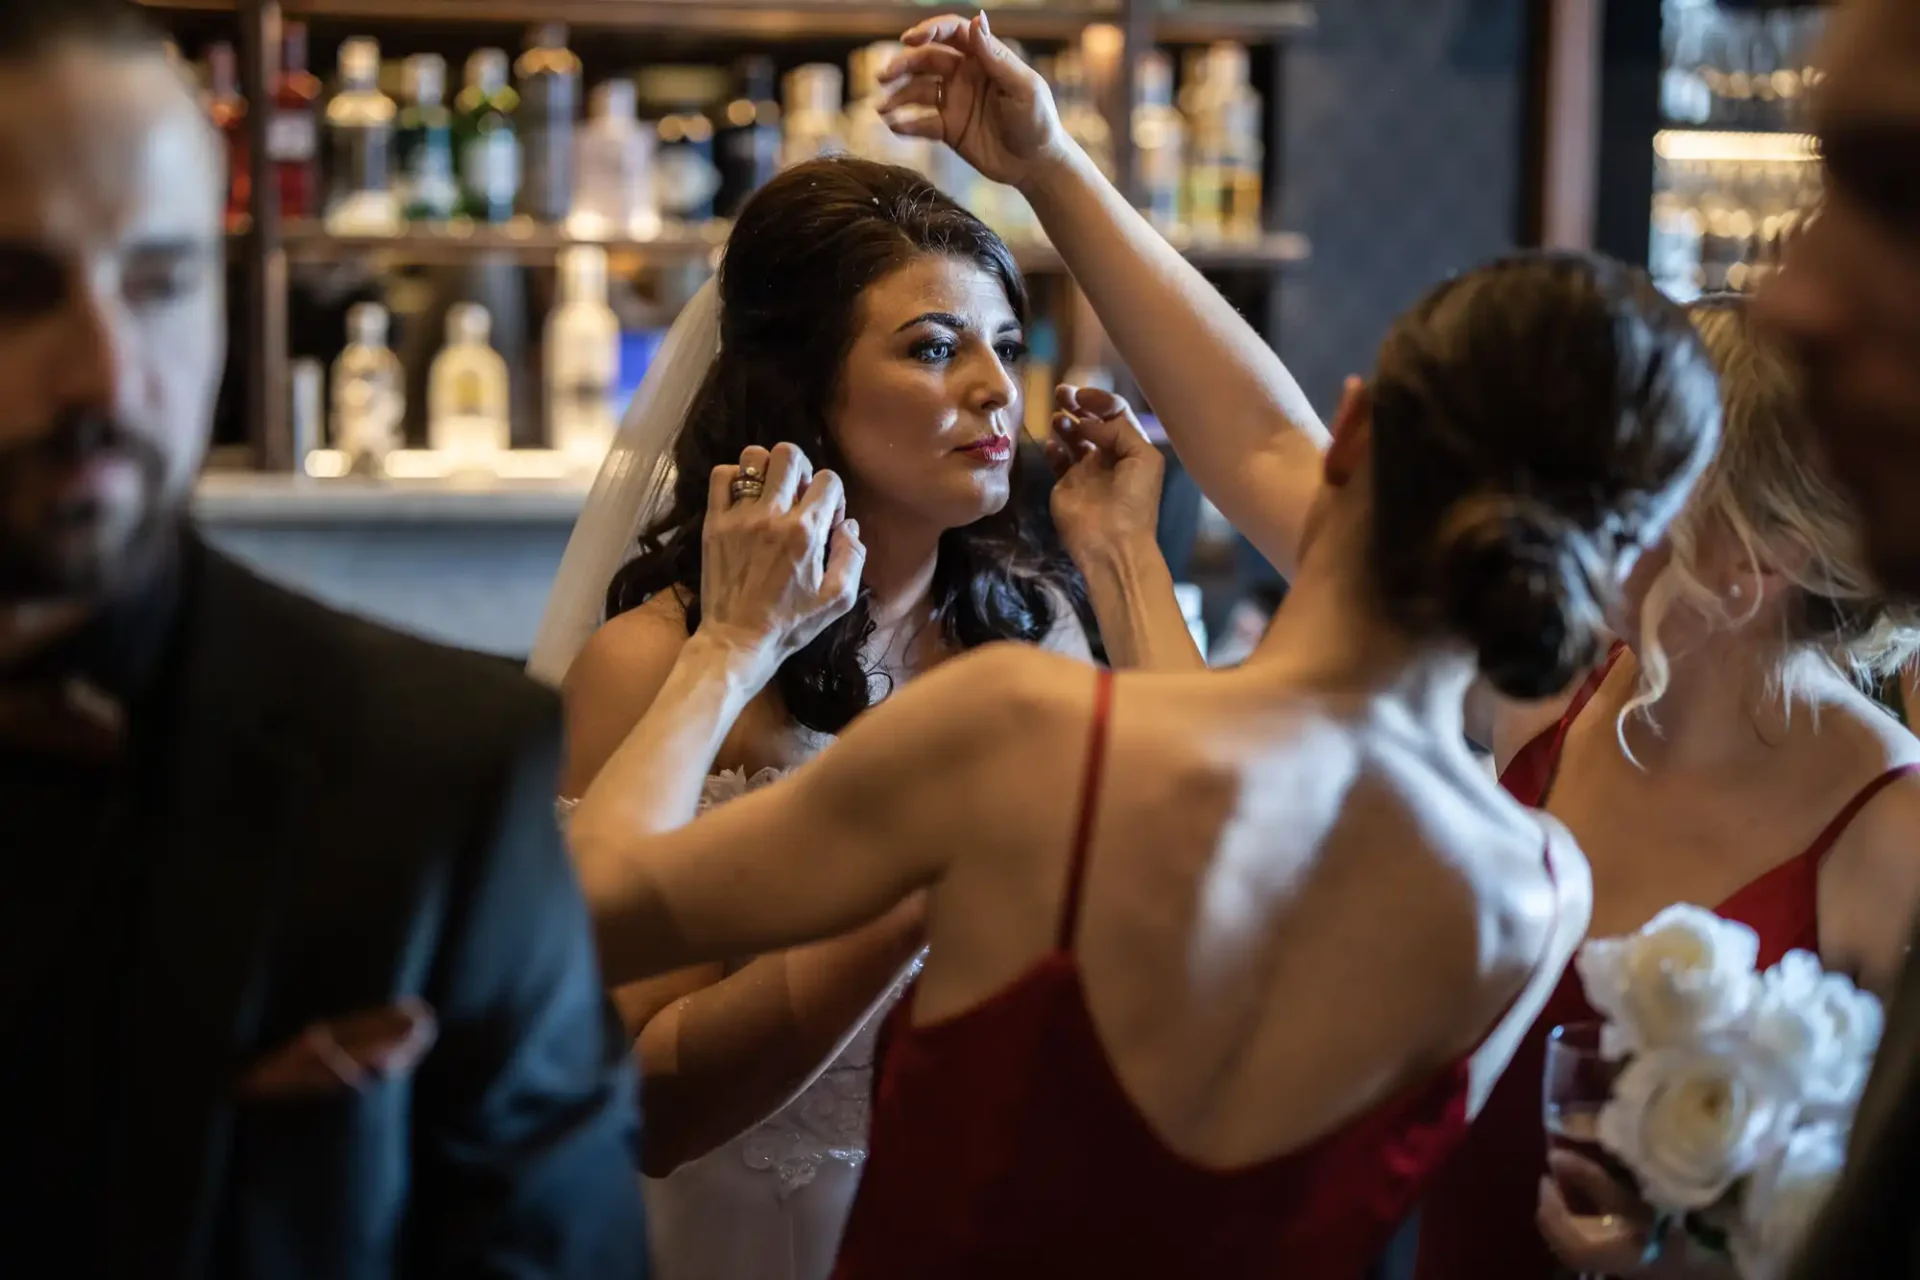 A bride gets assistance with her veil from a bridesmaid in a red dress, surrounded by other members of the wedding party in a bar setting.